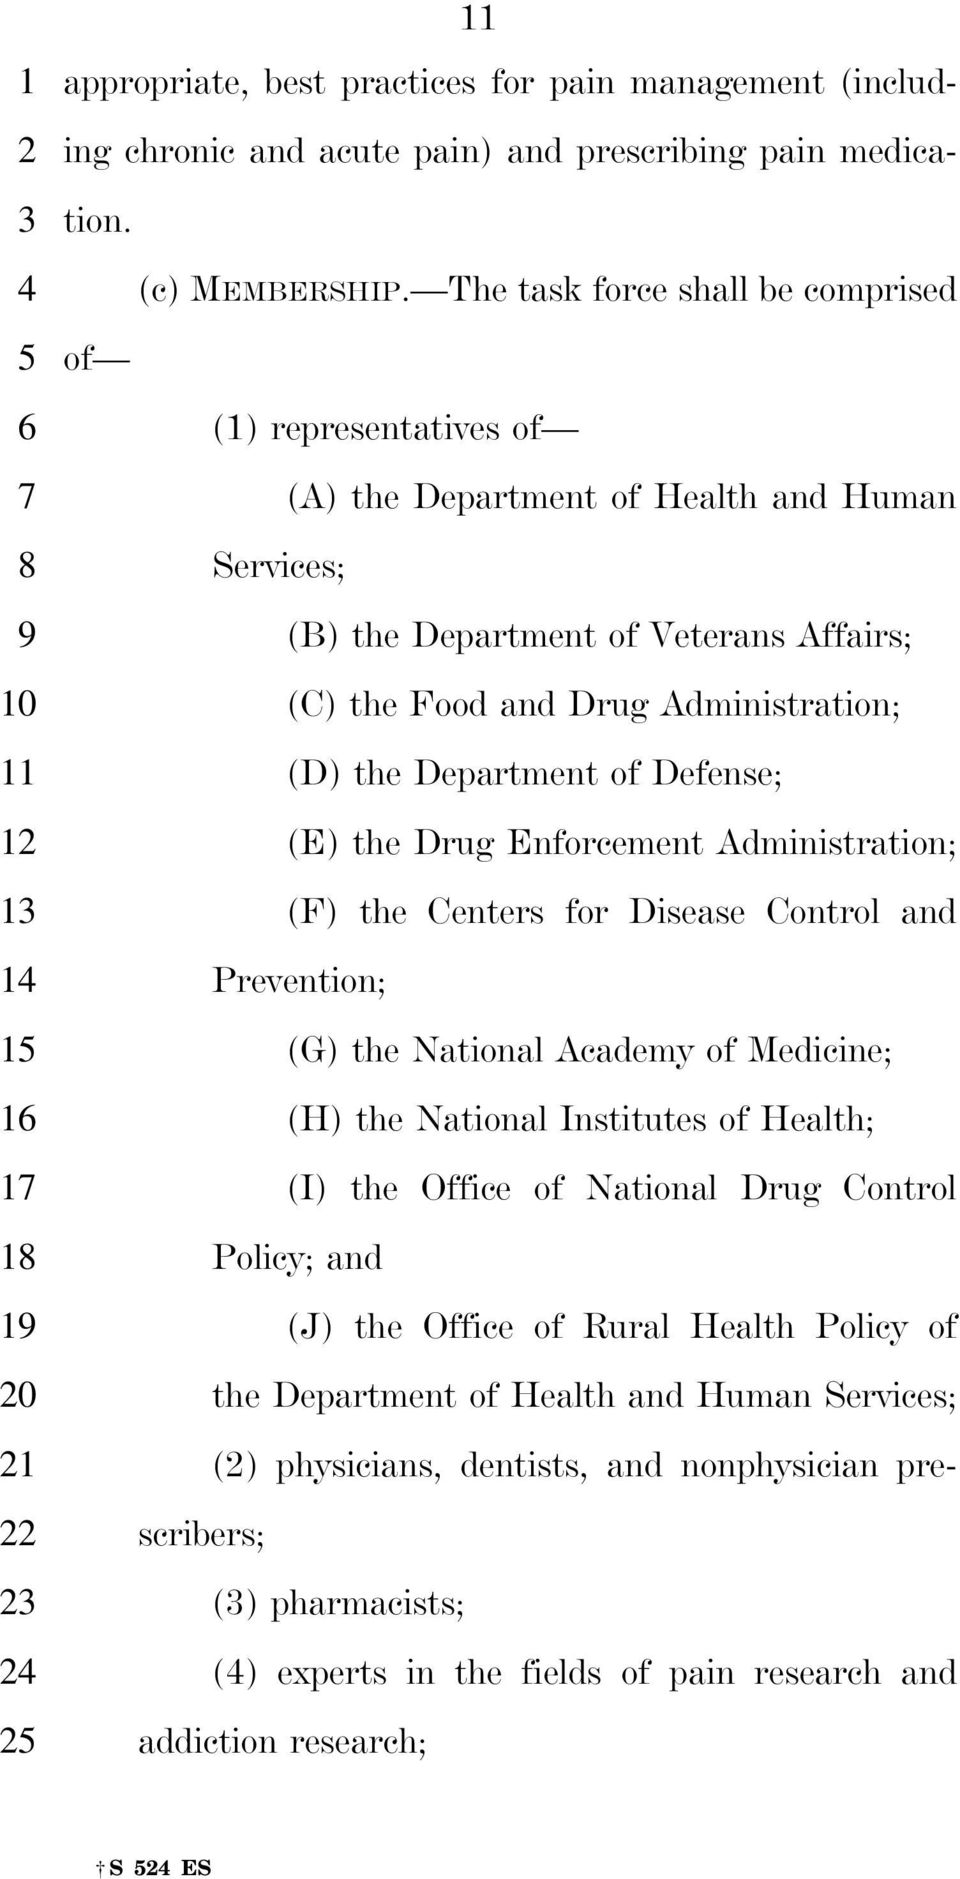 Department of Defense; (E) the Drug Enforcement Administration; (F) the Centers for Disease Control and Prevention; (G) the National Academy of Medicine; (H) the National Institutes of Health; (I)